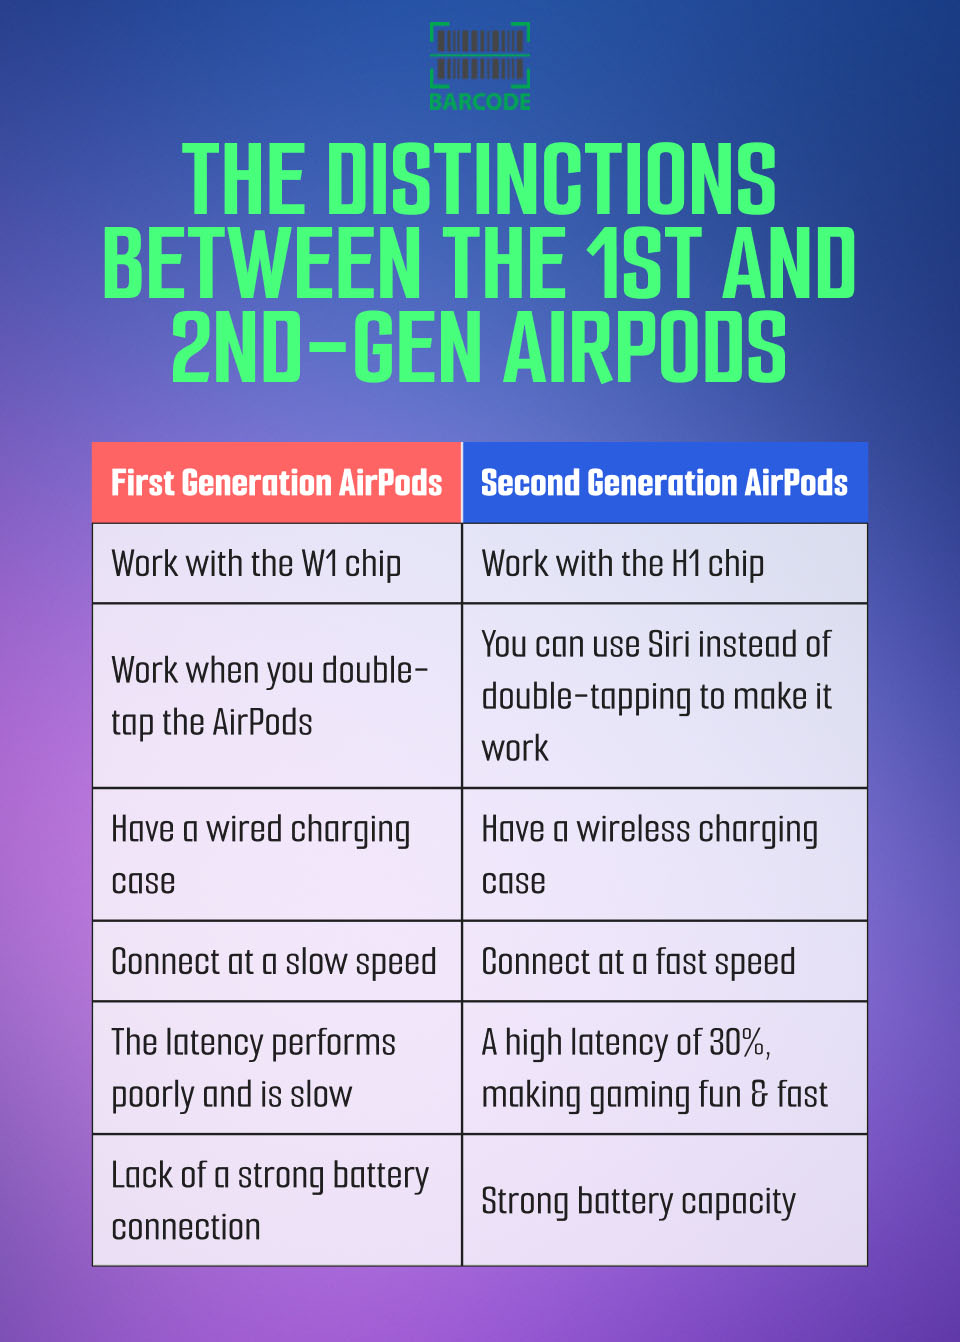 The differences between the 1st and 2nd-gen AirPods